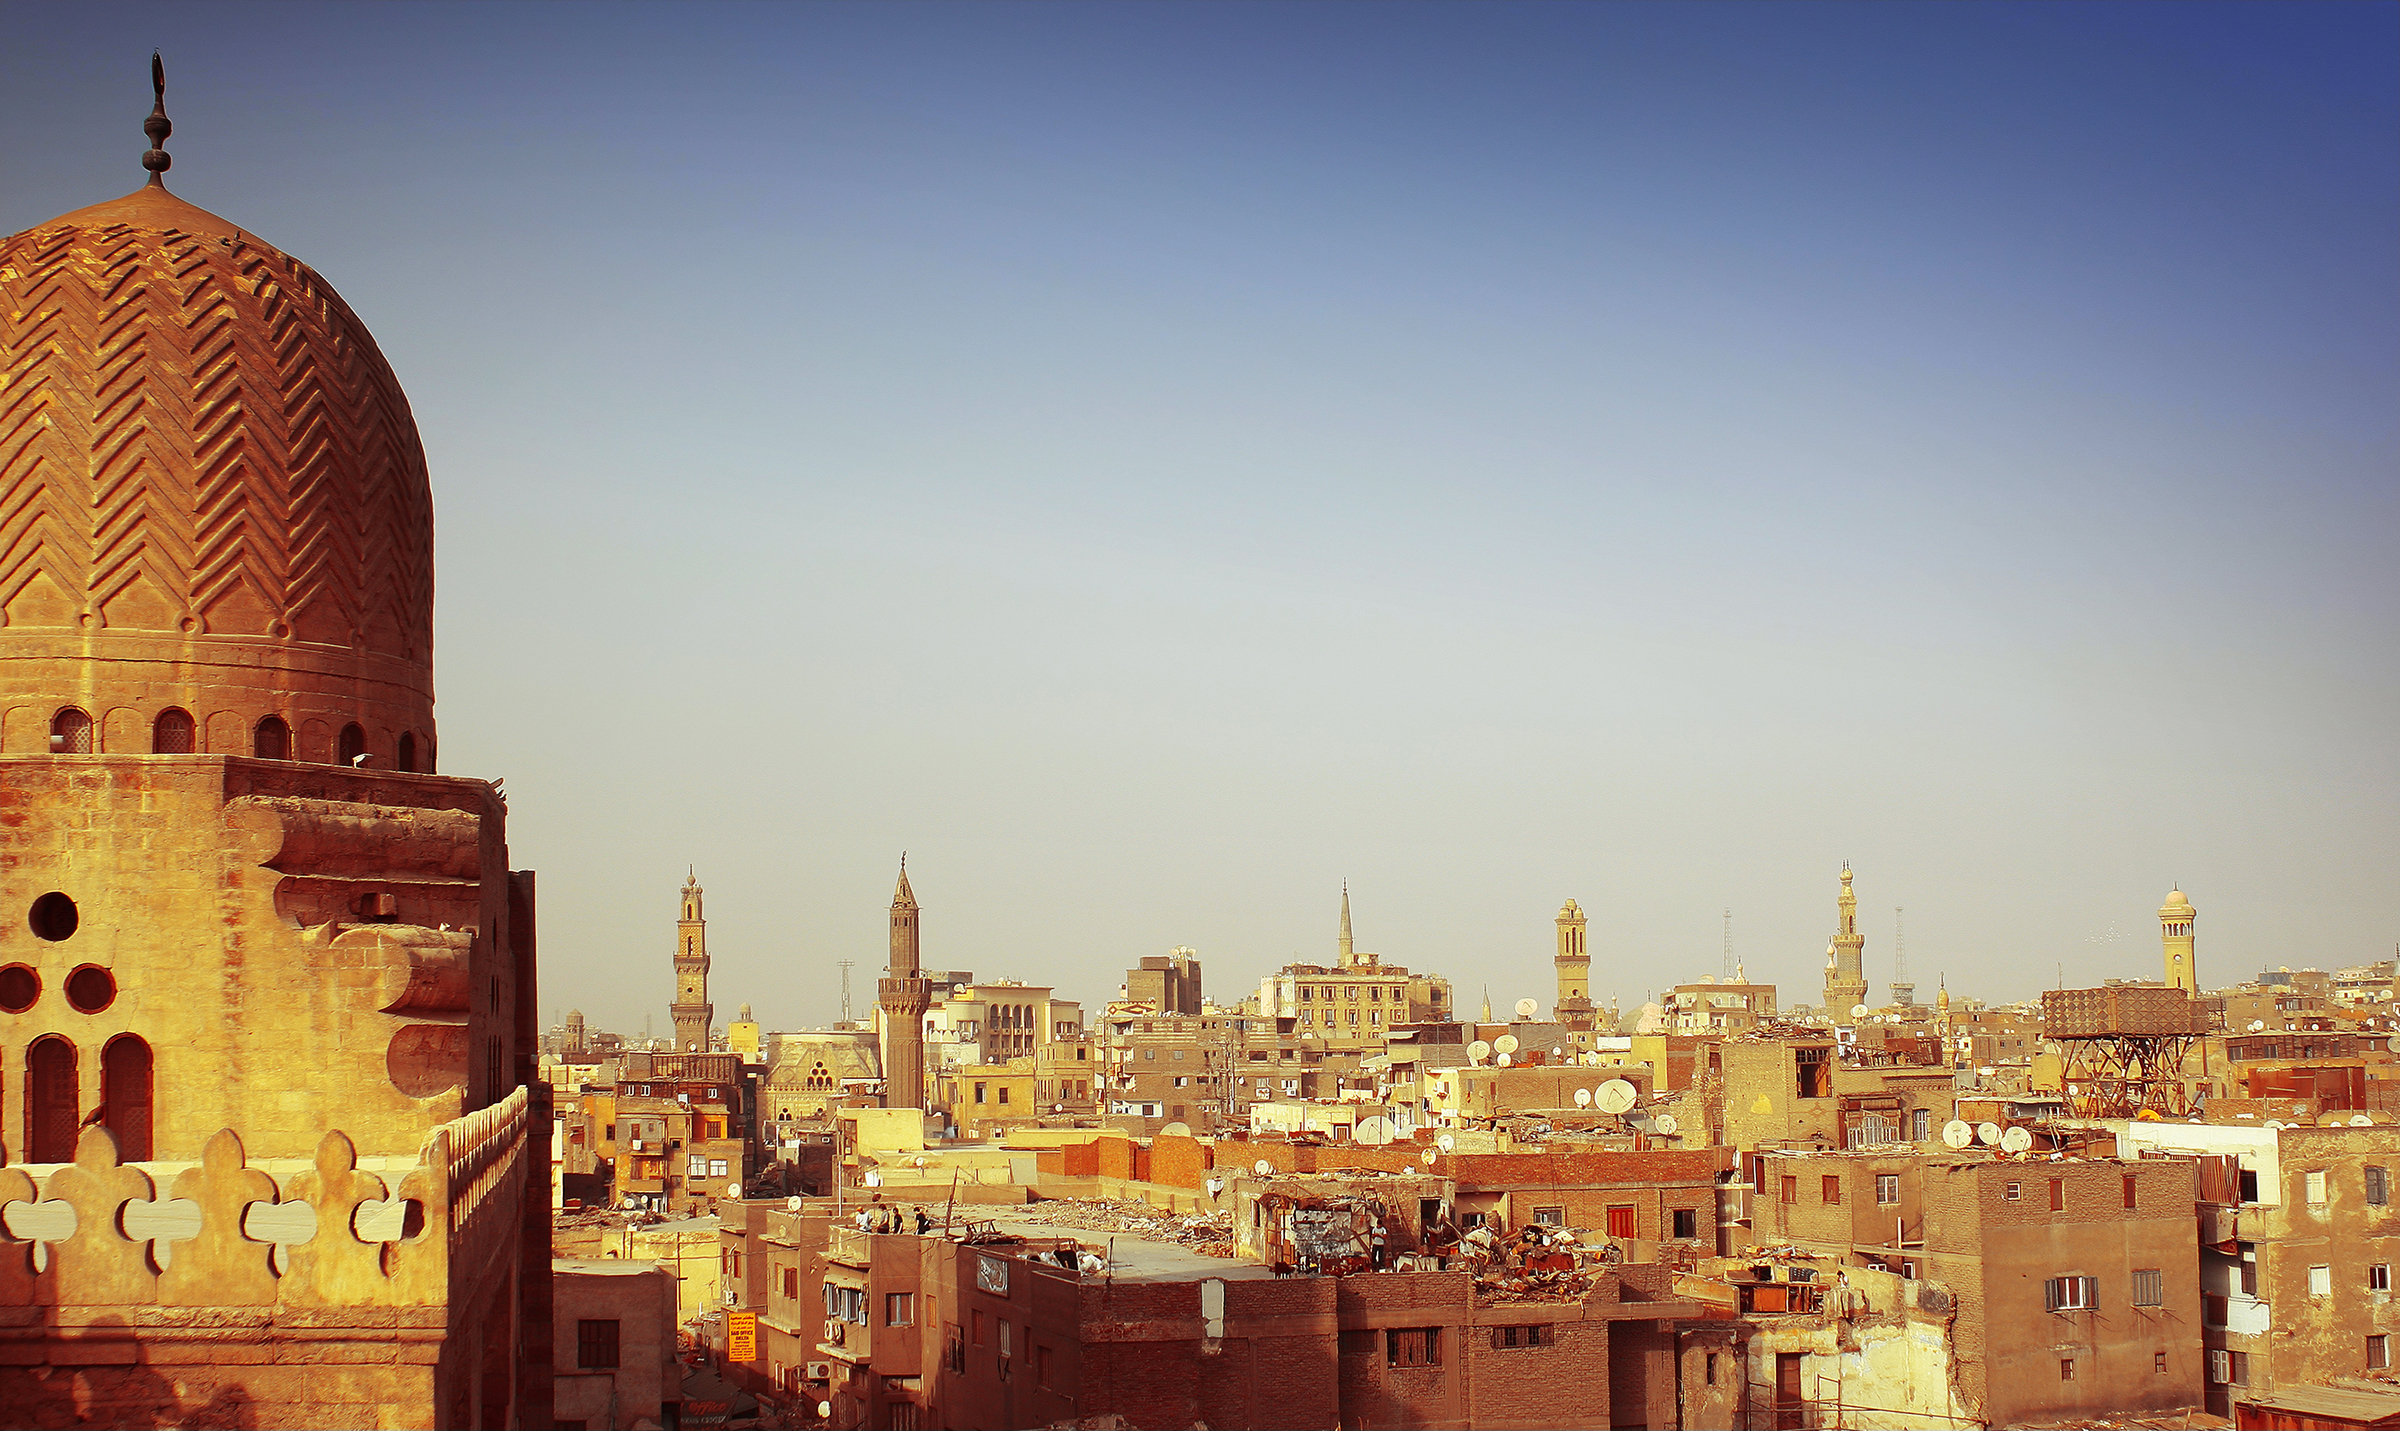 Skyline and architecture in Cairo, Egypt